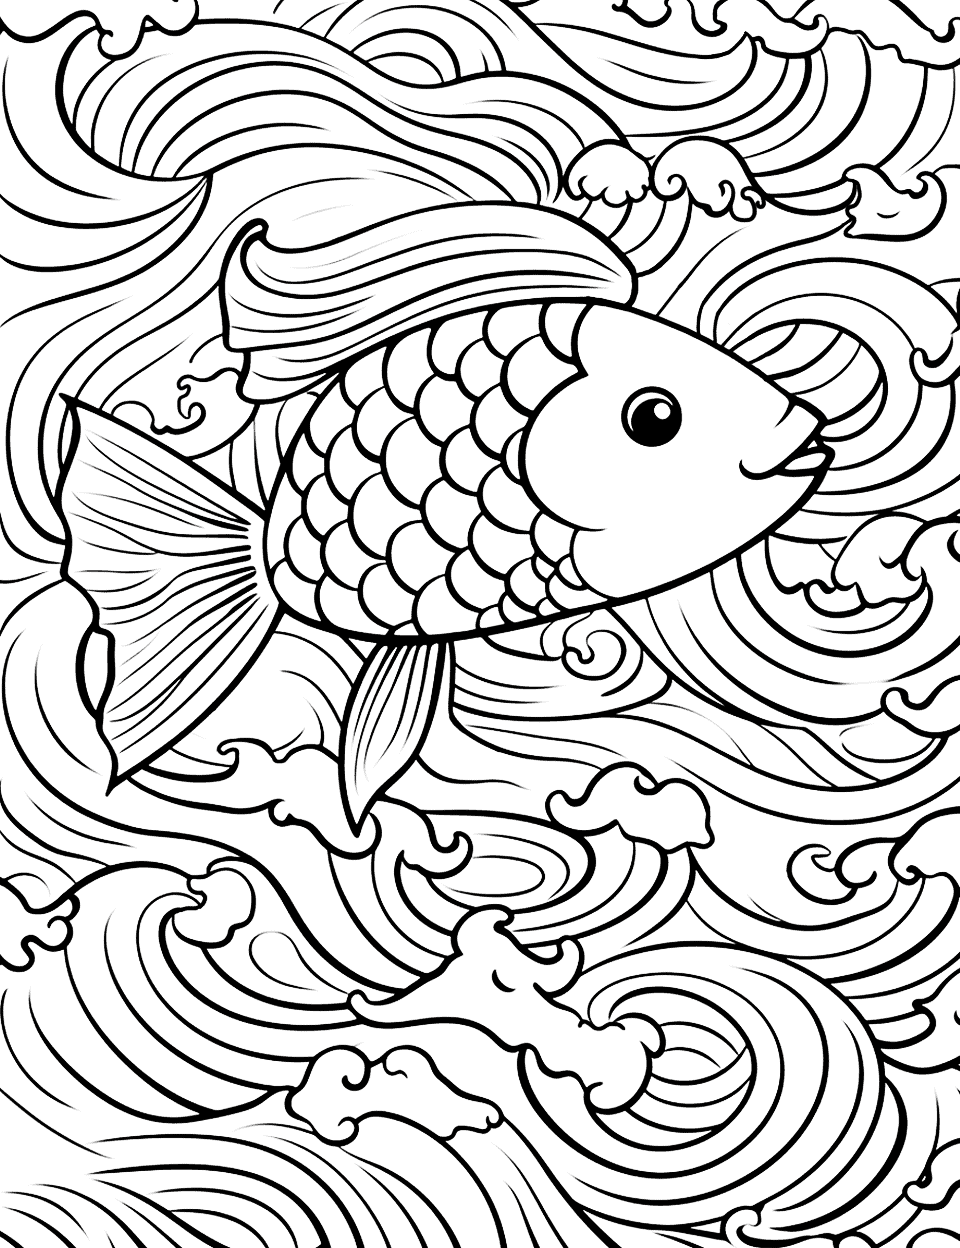 Ocean Waves and Fish Coloring Page - Fish riding the waves and having a great time.